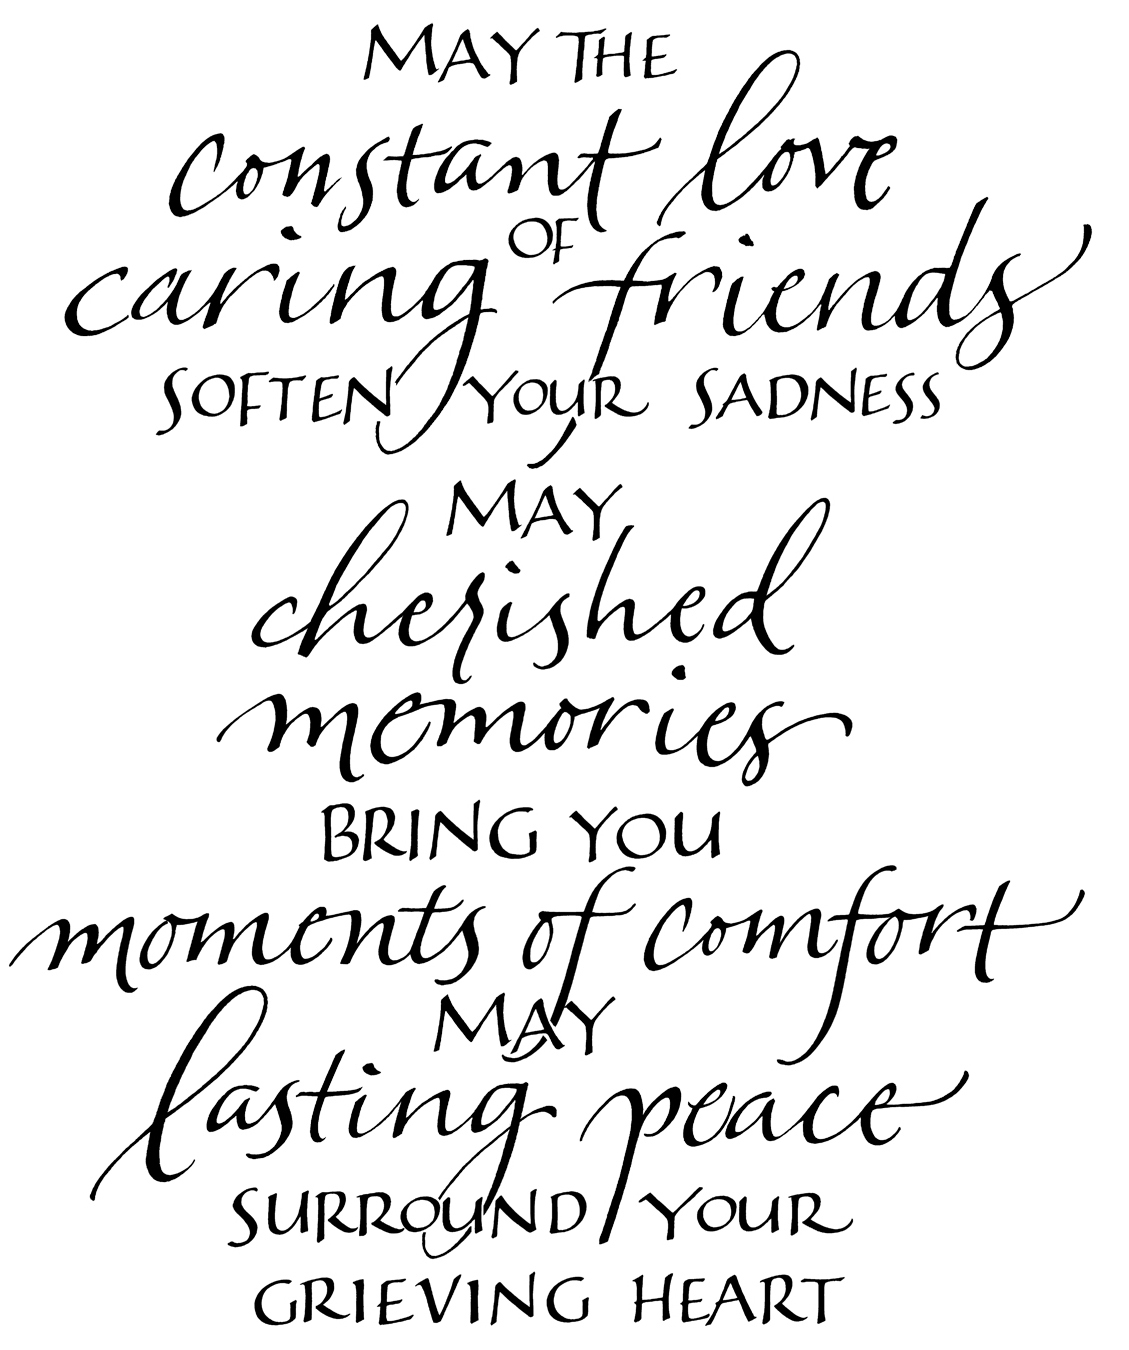 May the constant love of caring friends soften your sadness. May cherished memories bring you moments of comfort. May lasting peace surround....